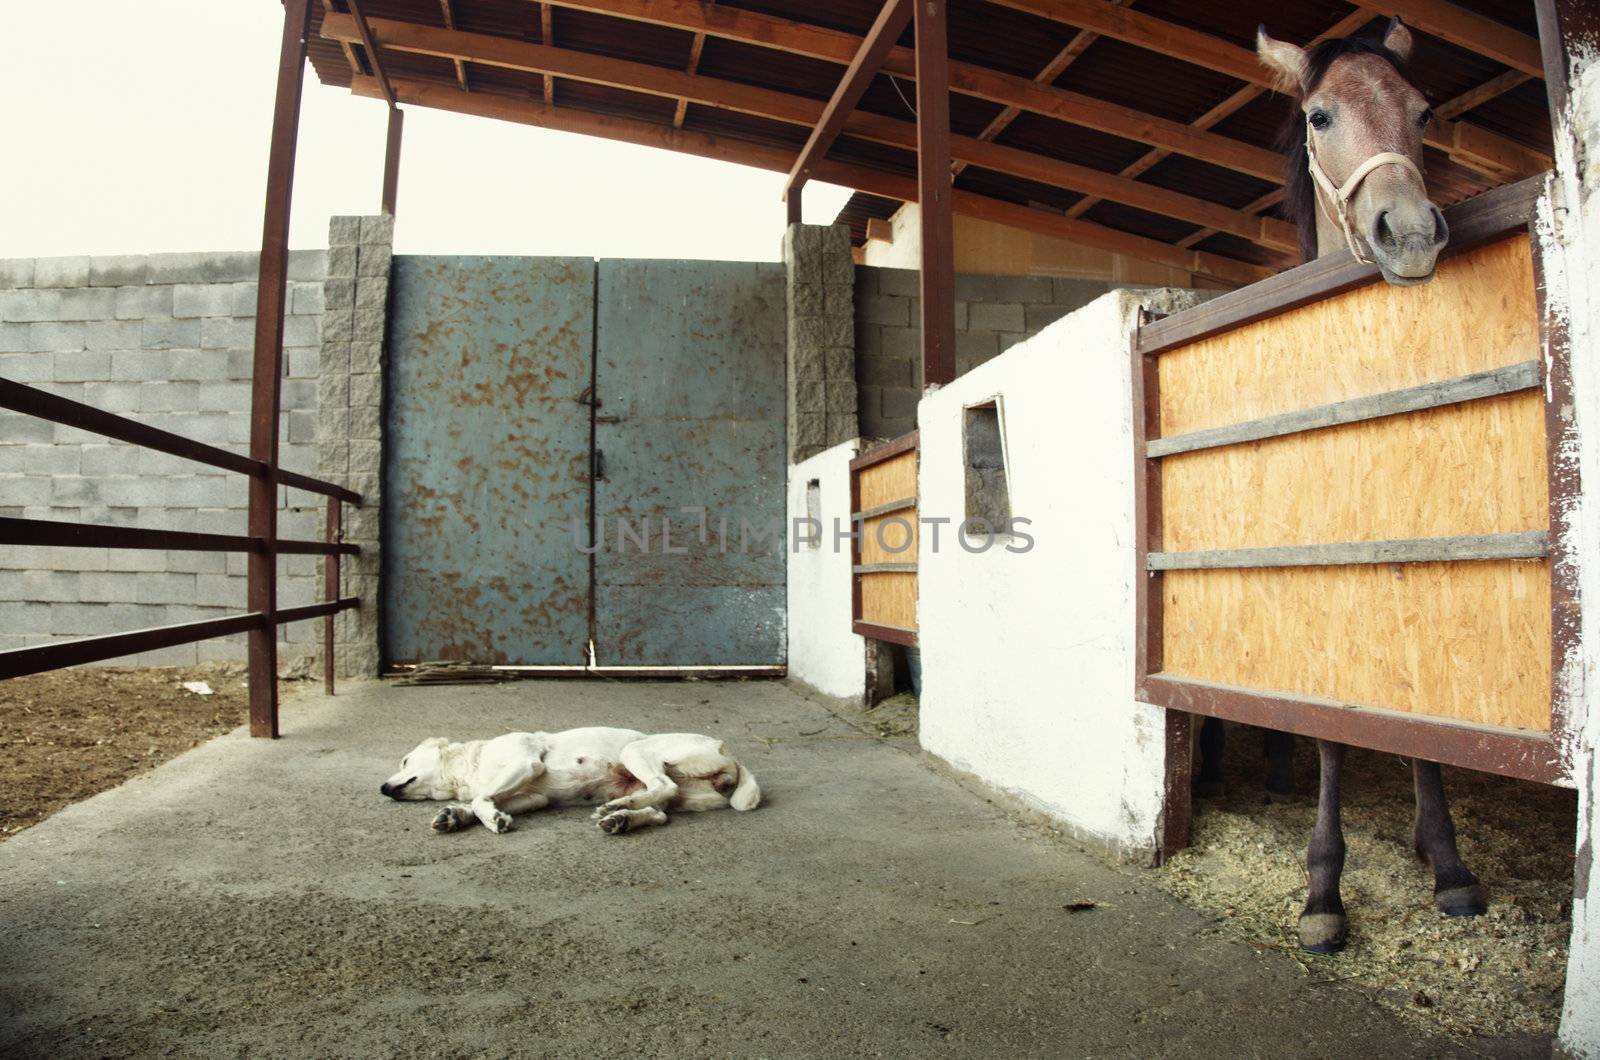 Horse in the stable and watch-dog sleeping. Natural light. Artistic colors added